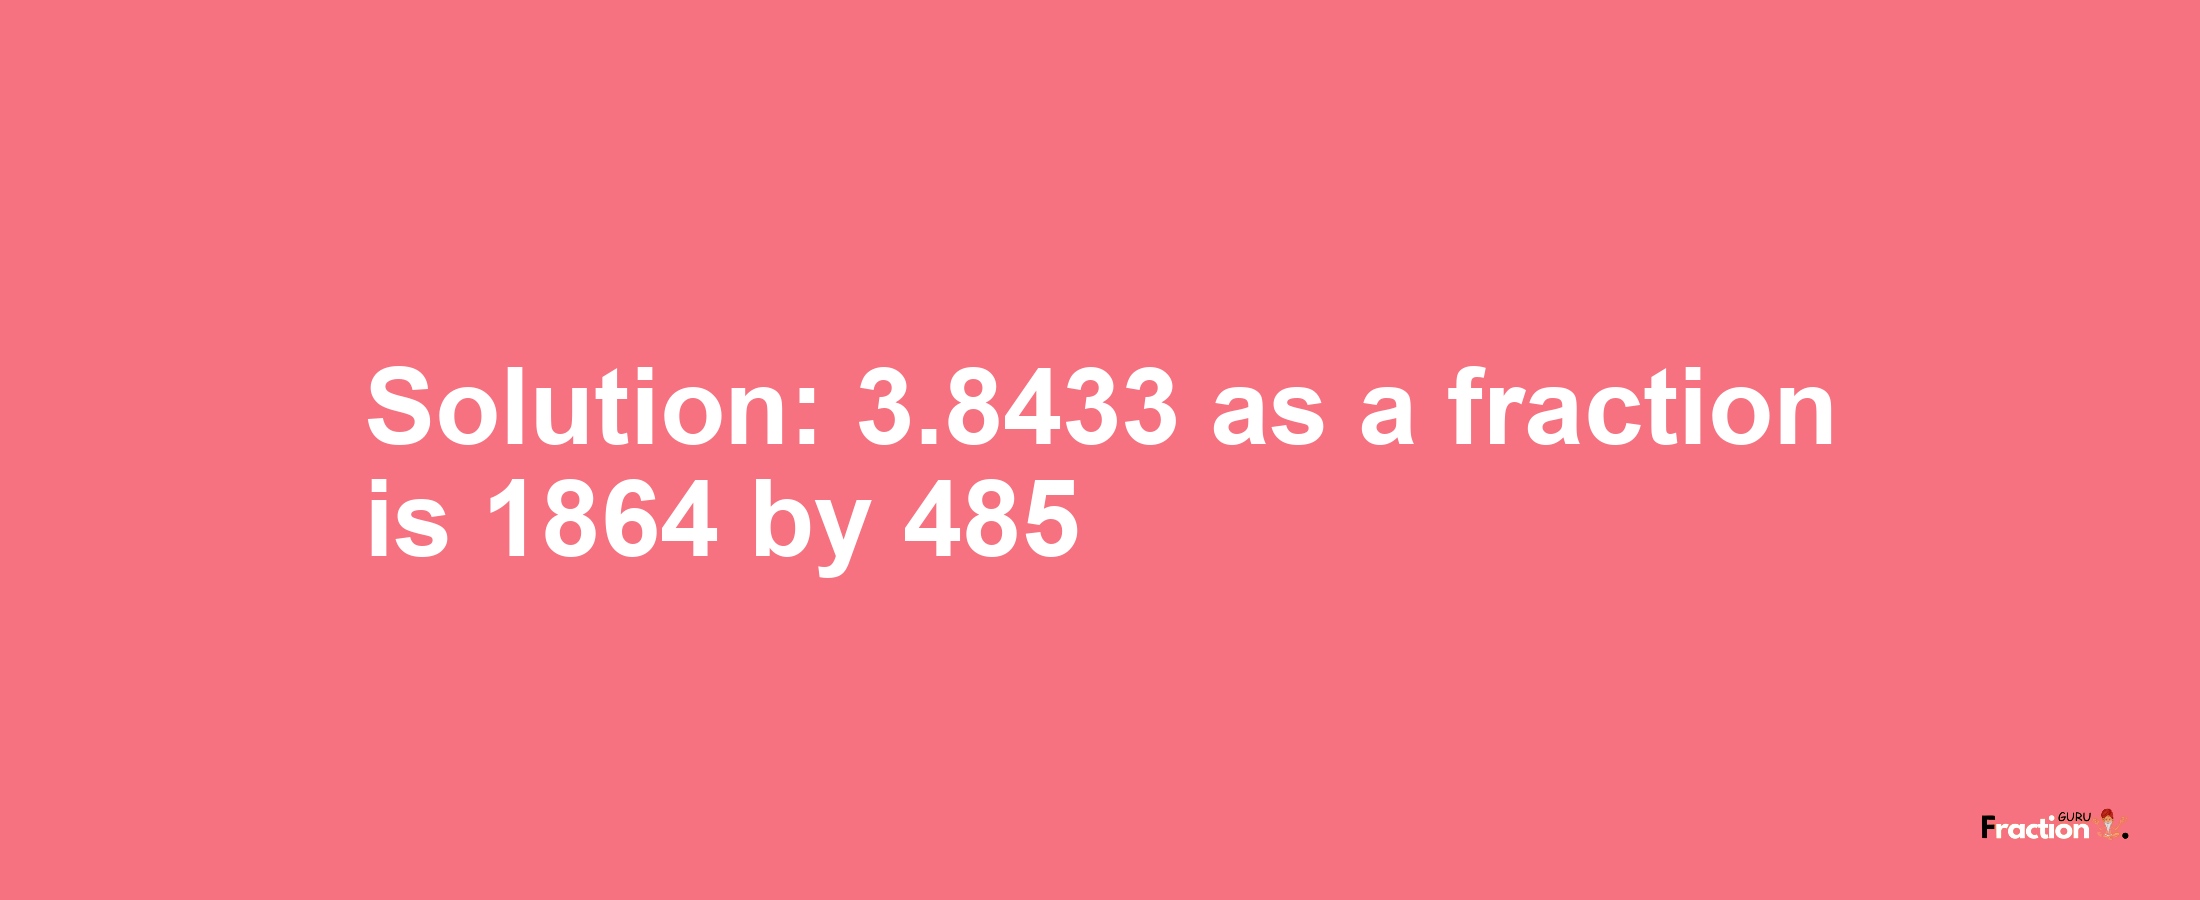 Solution:3.8433 as a fraction is 1864/485